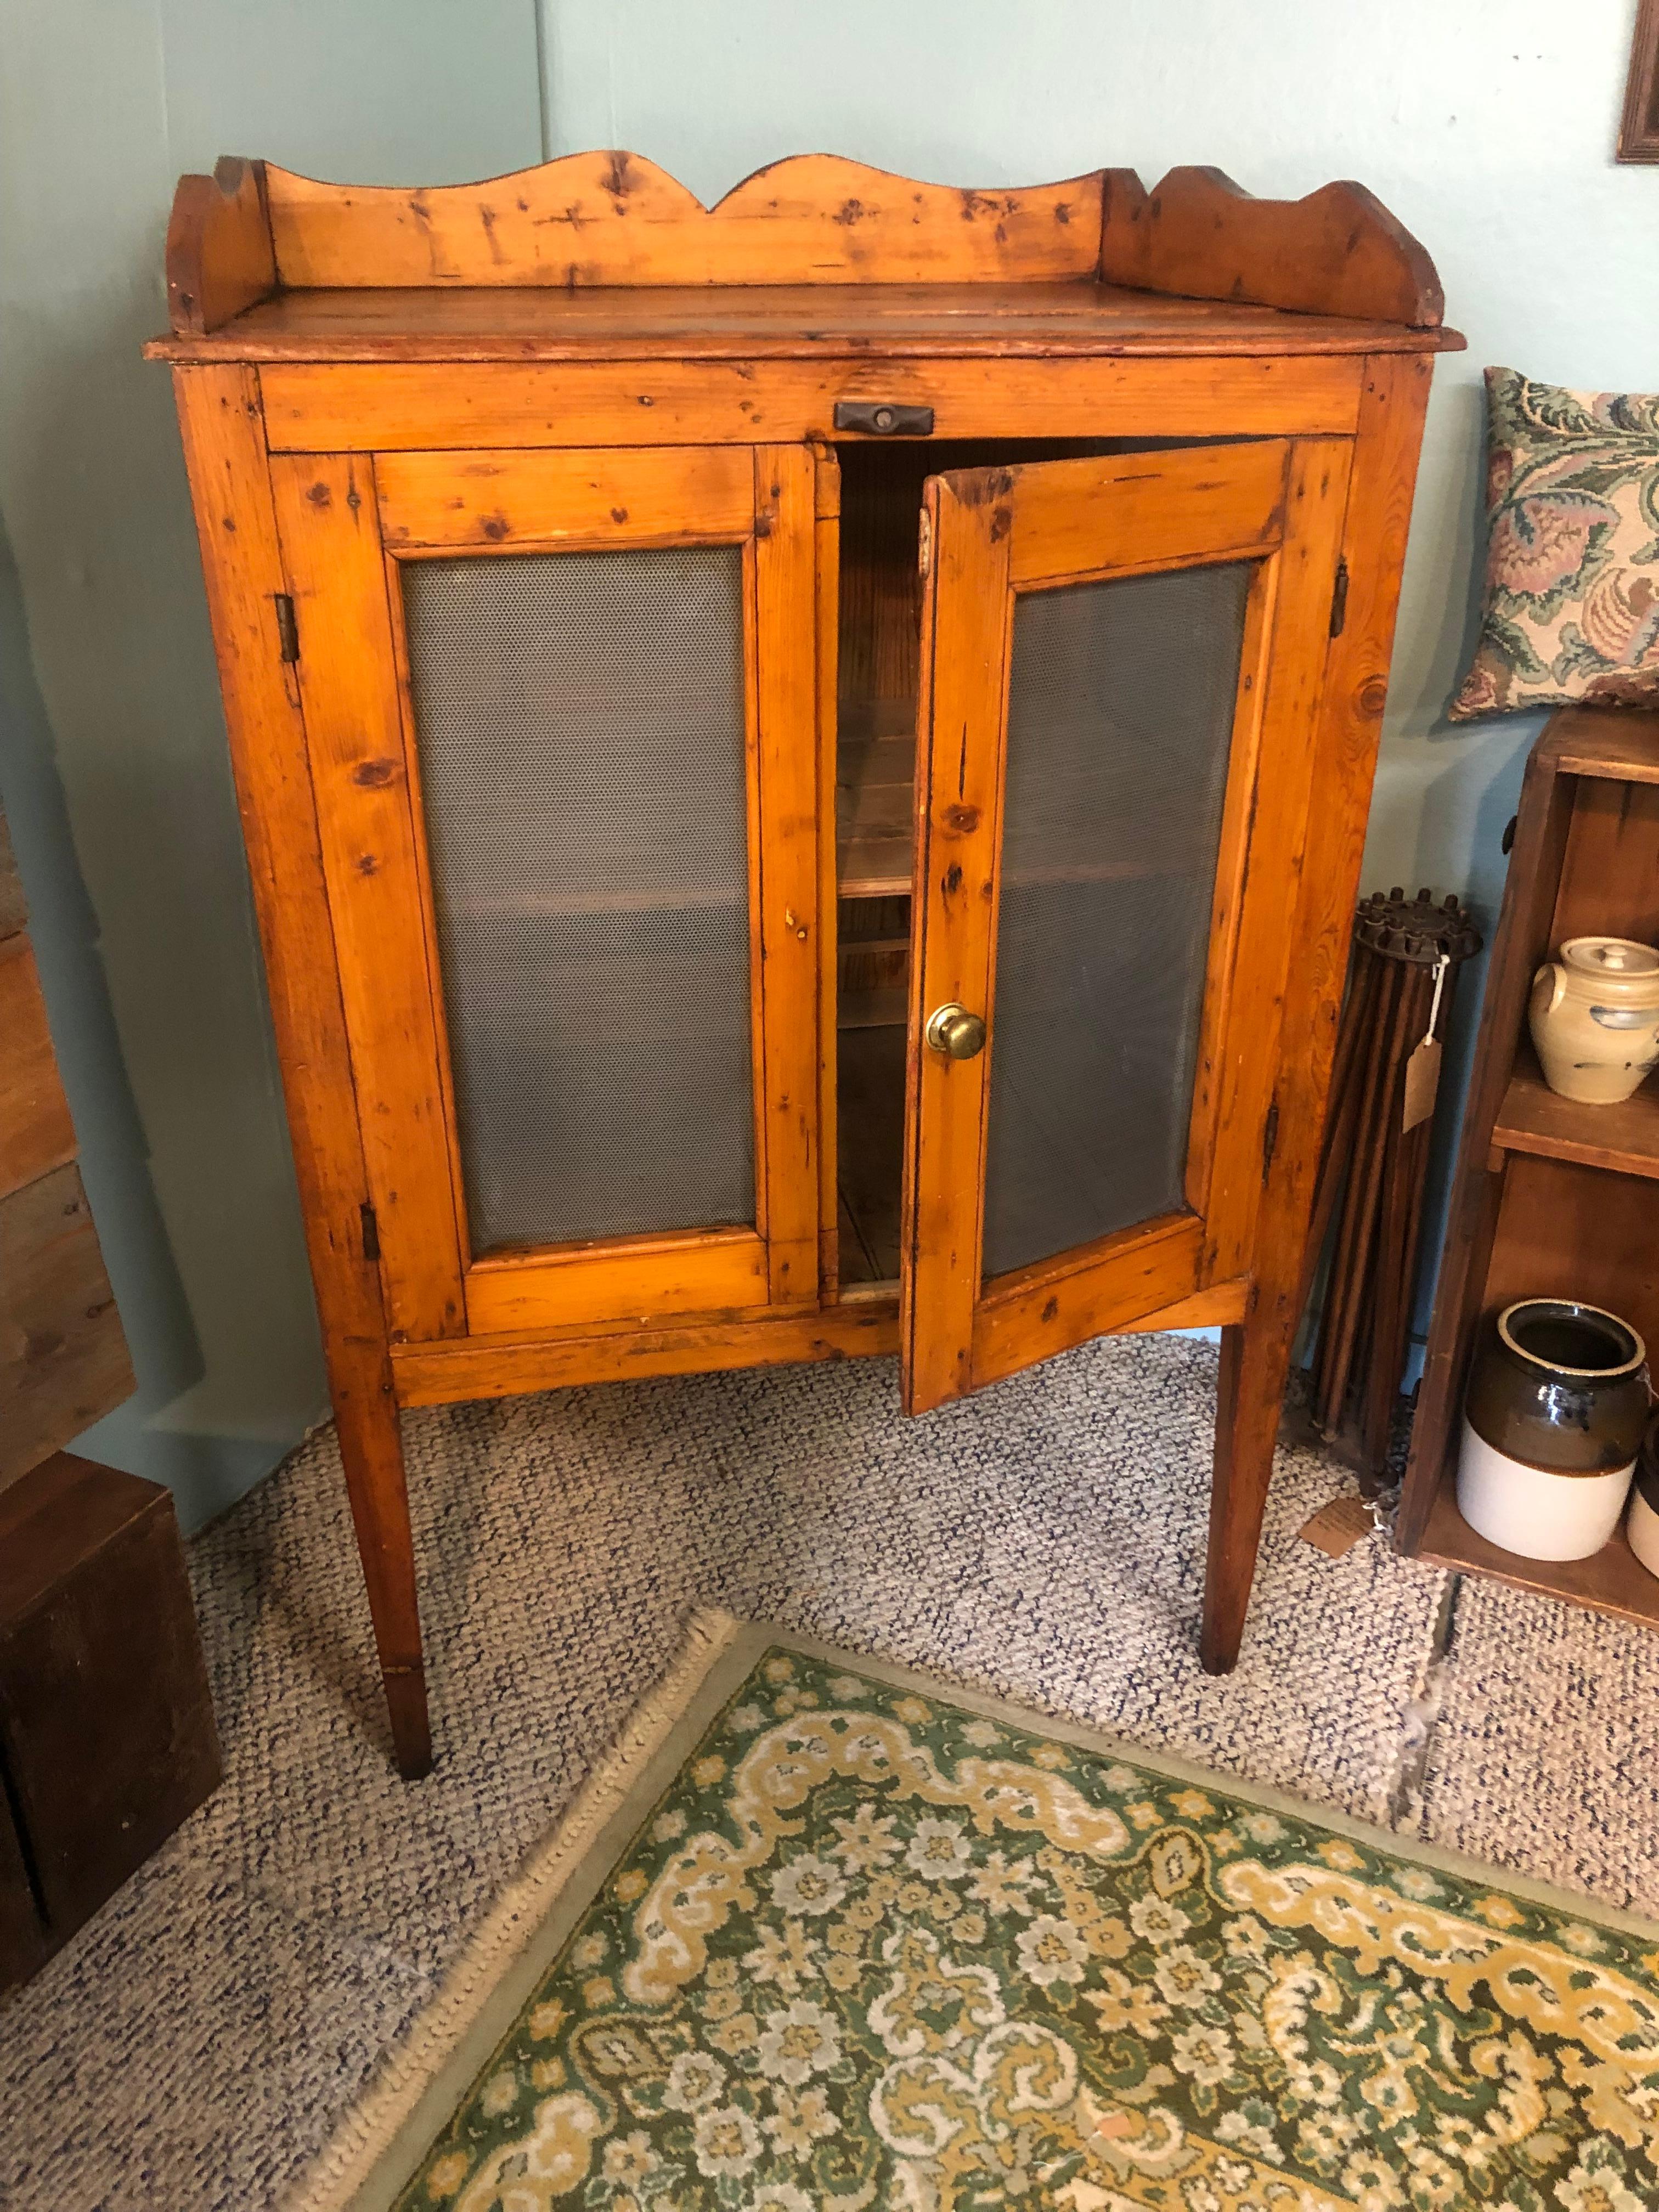 Authentic and oozing with character, a 19th century American Baltic Pine pie safe with gorgeous patina having scalloped top and original wire netting on front doors and sides. There are two shelves; bottom shelf to top 14